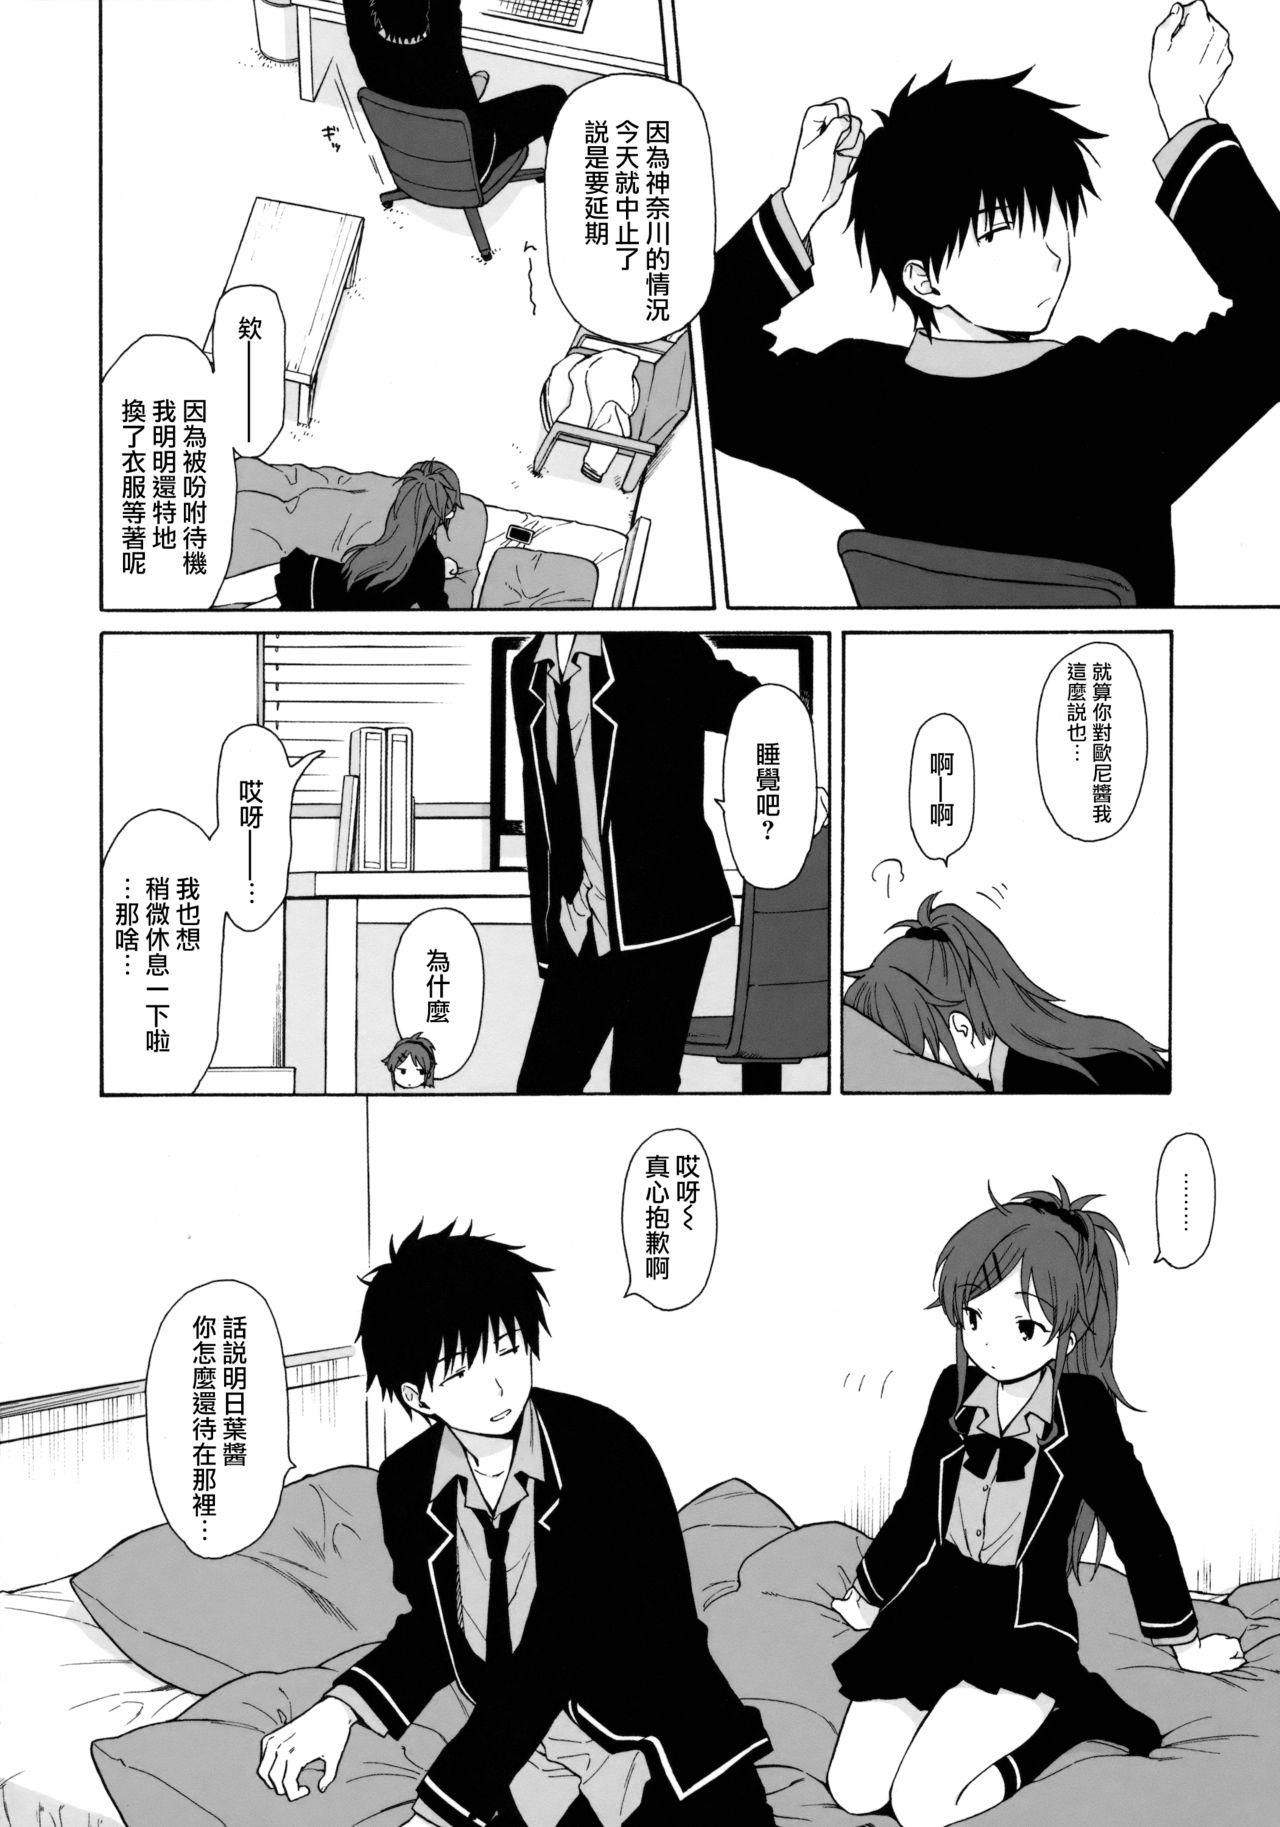 And Good Morning Chiba - Qualidea code Spa - Page 8